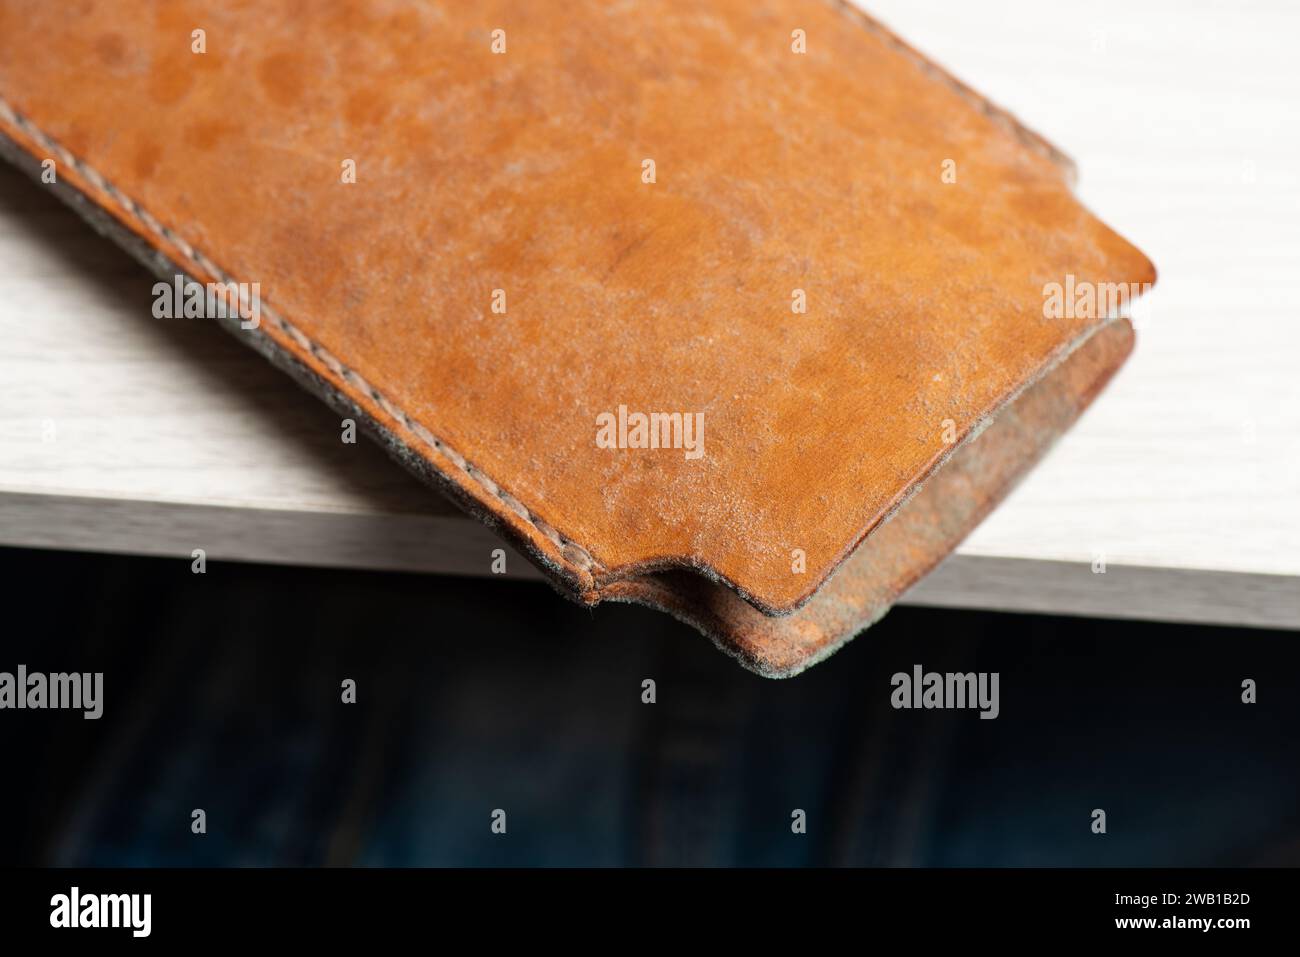 Mould on leather product. Leather care concept. Stock Photo